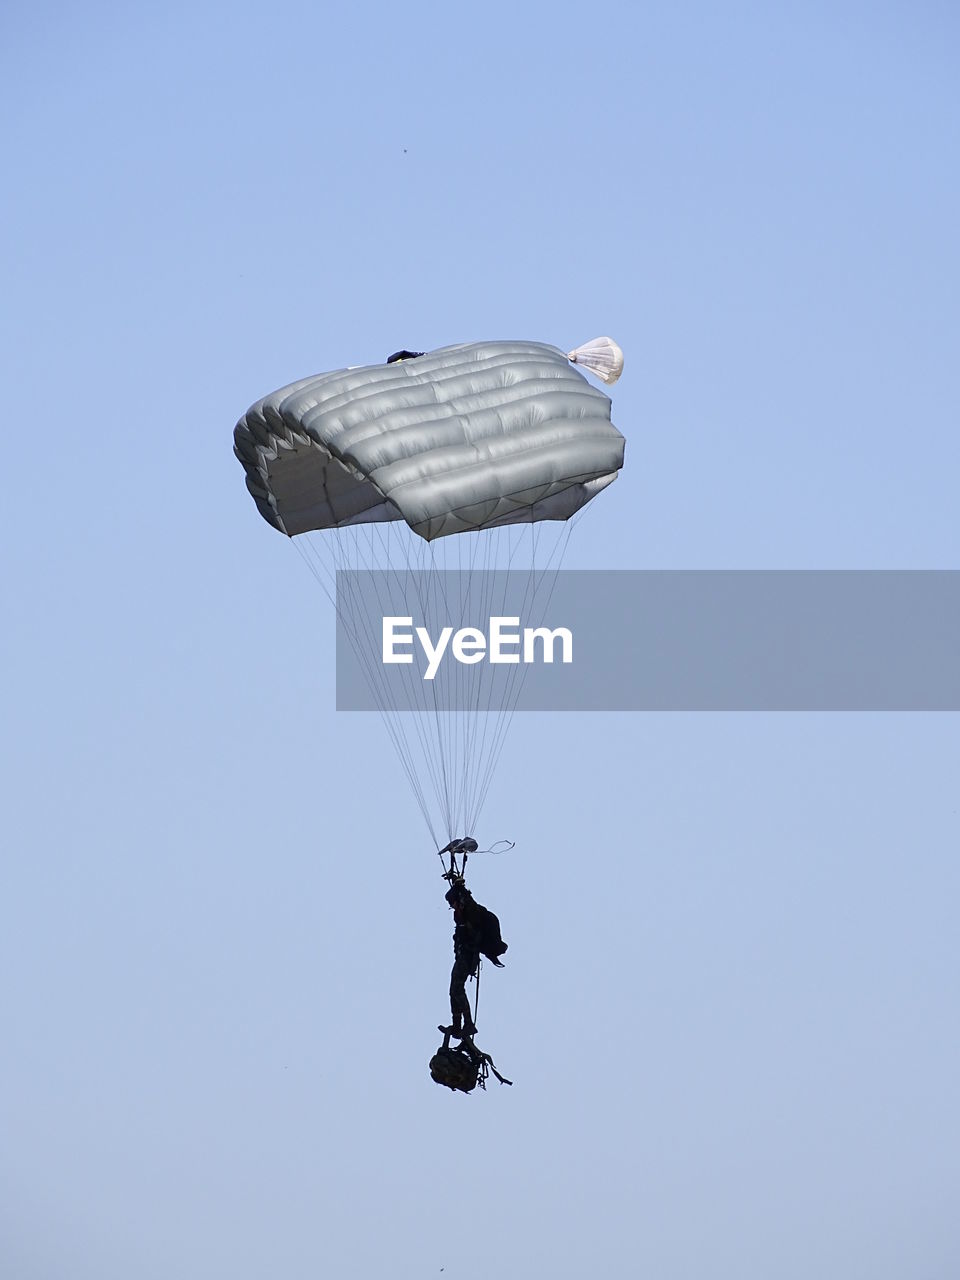 LOW ANGLE VIEW OF PERSON PARAGLIDING OVER CLEAR SKY